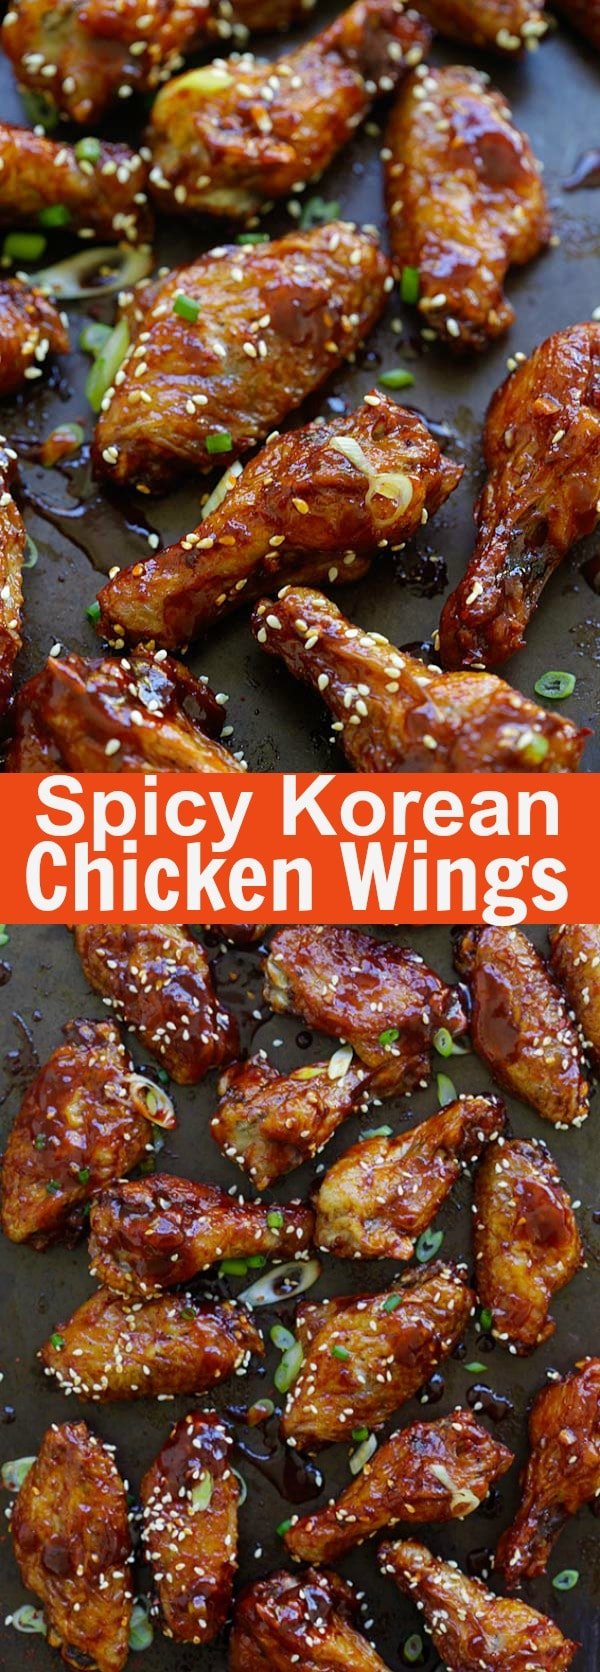 Spicy Korean Chicken Wings - crazy yummy baked Korean chicken wings with sweet and savory Korean red pepper sauce. Finger lickin' good! | rasamalaysia.com